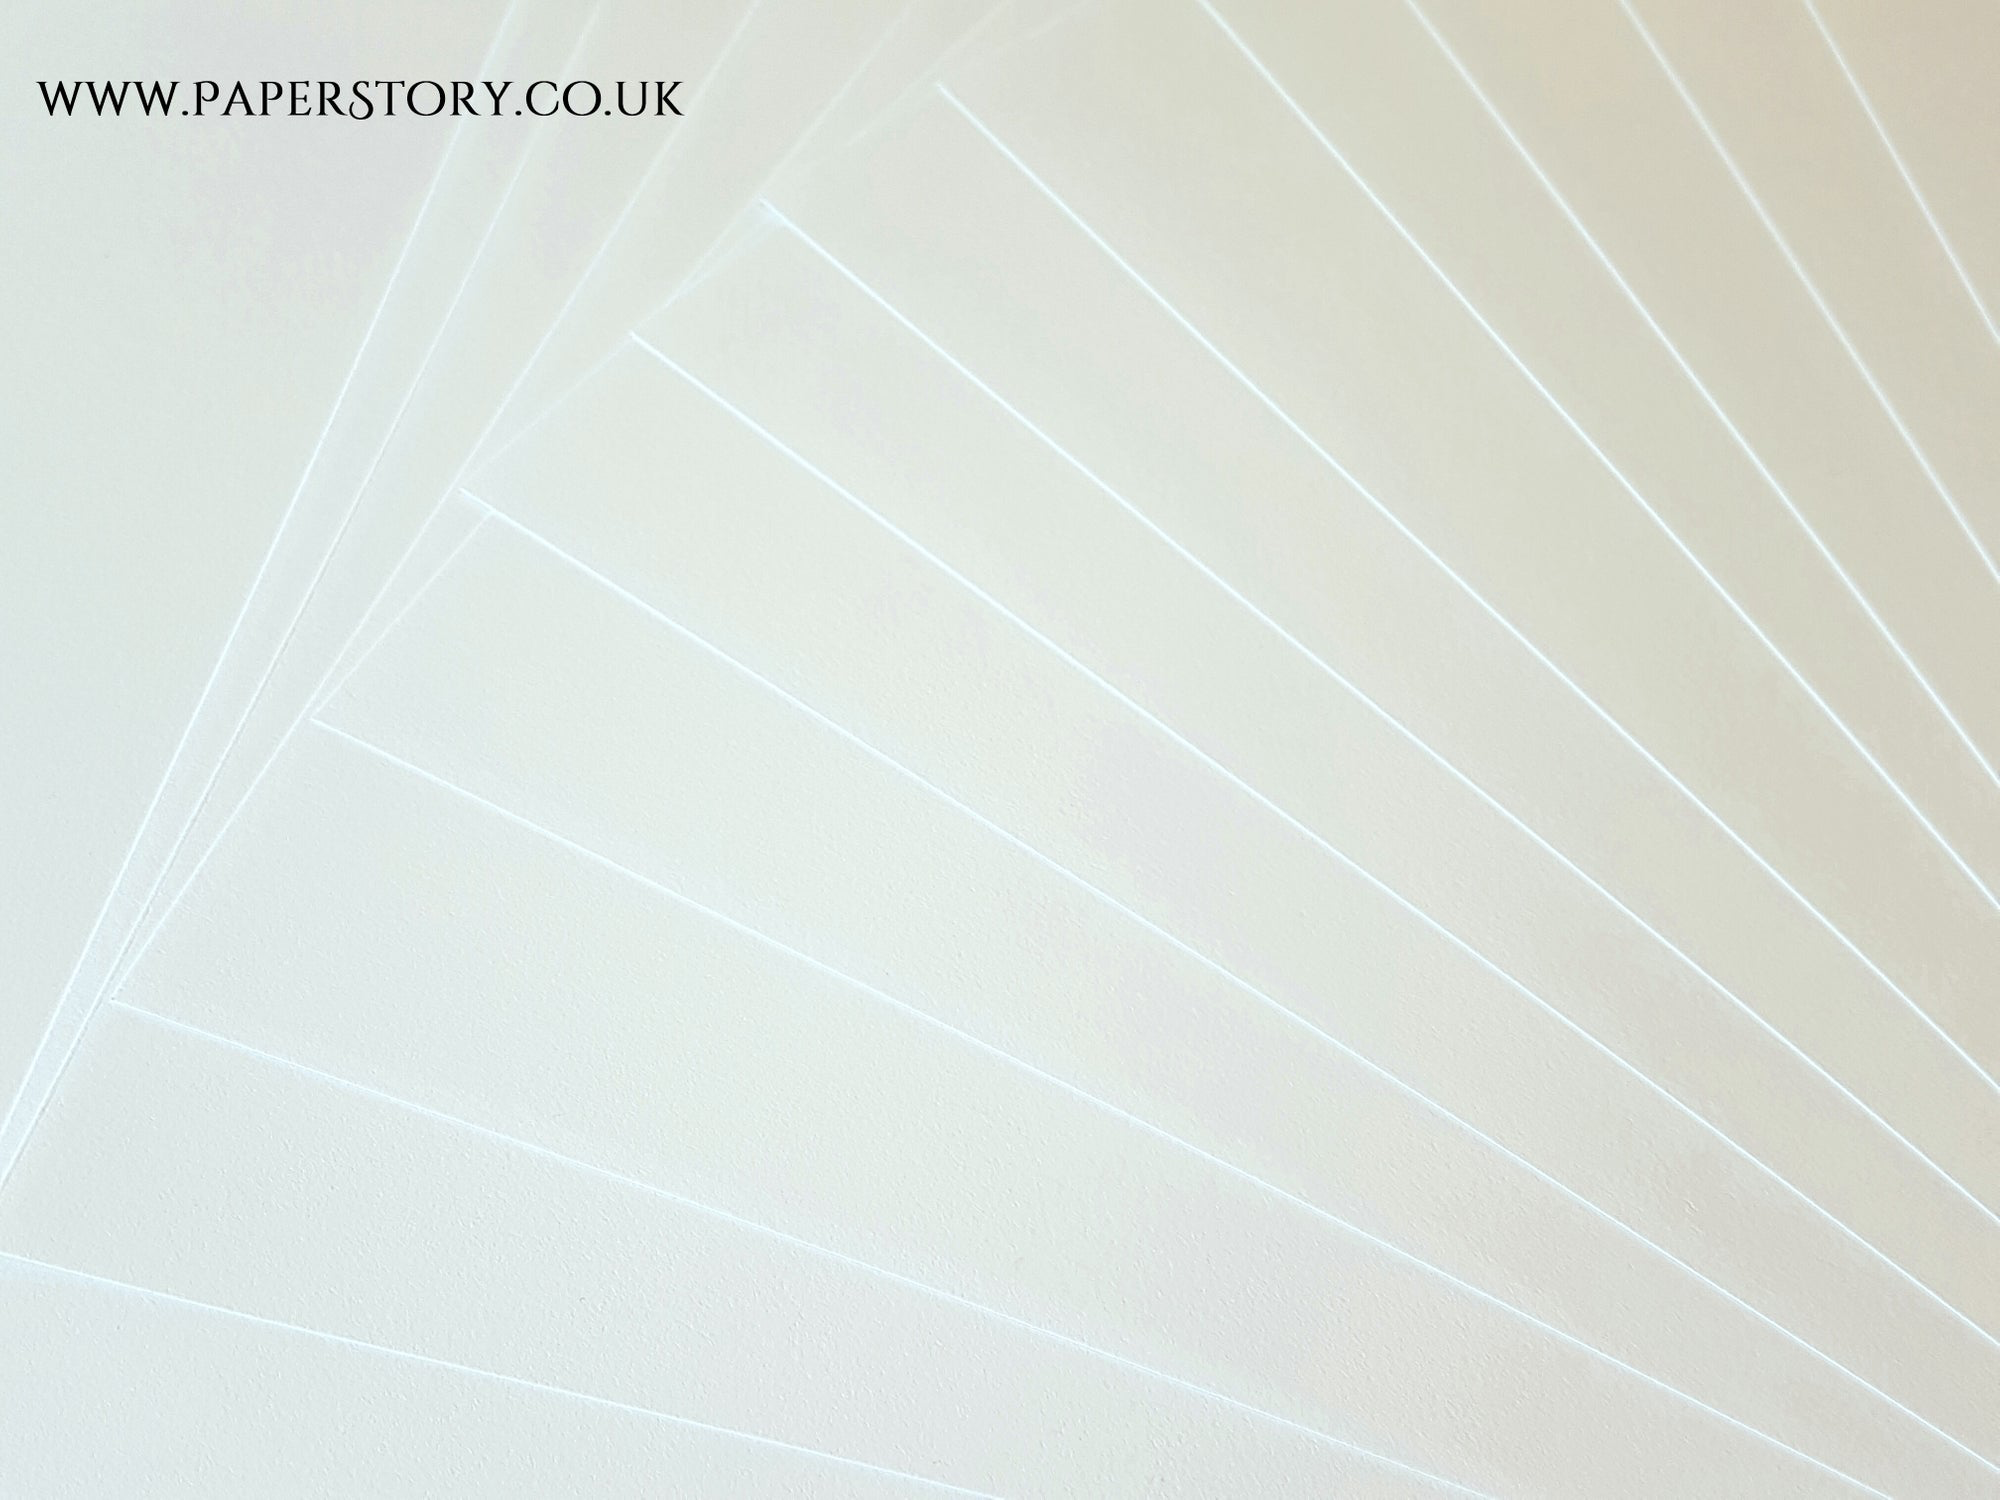 Conqueror 100% Cotton paper 160 gsm, soft white. This 100 % Cotton tree free, smooth soft white paper is ideal for printing, Papercutting, plus brush lettering calligraphy projects. The benchmark for luxury and quality